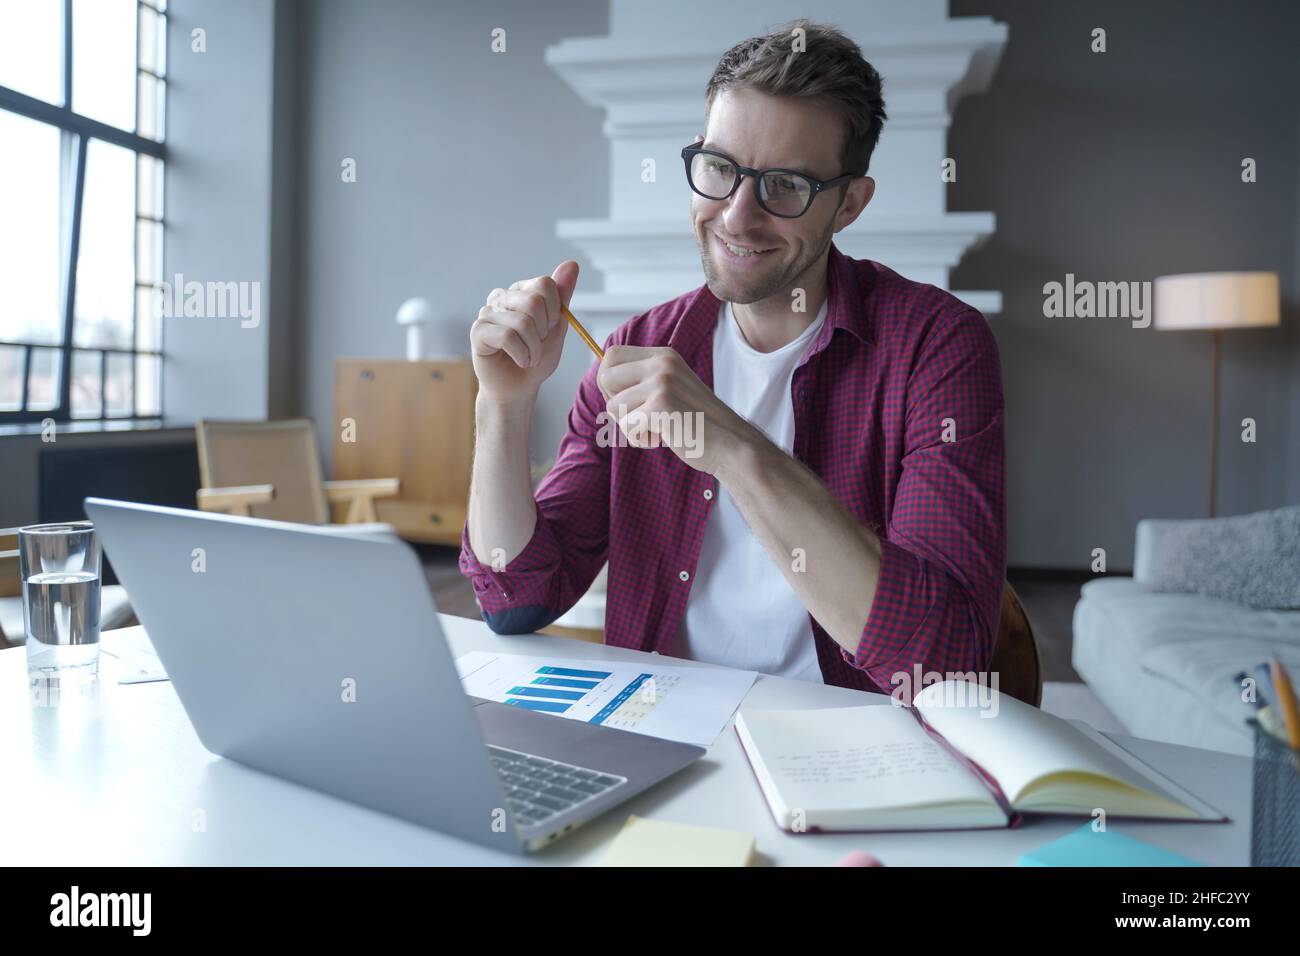 German young male entrepreneur in glasses having pleasant online conversation with colleagues Stock Photo